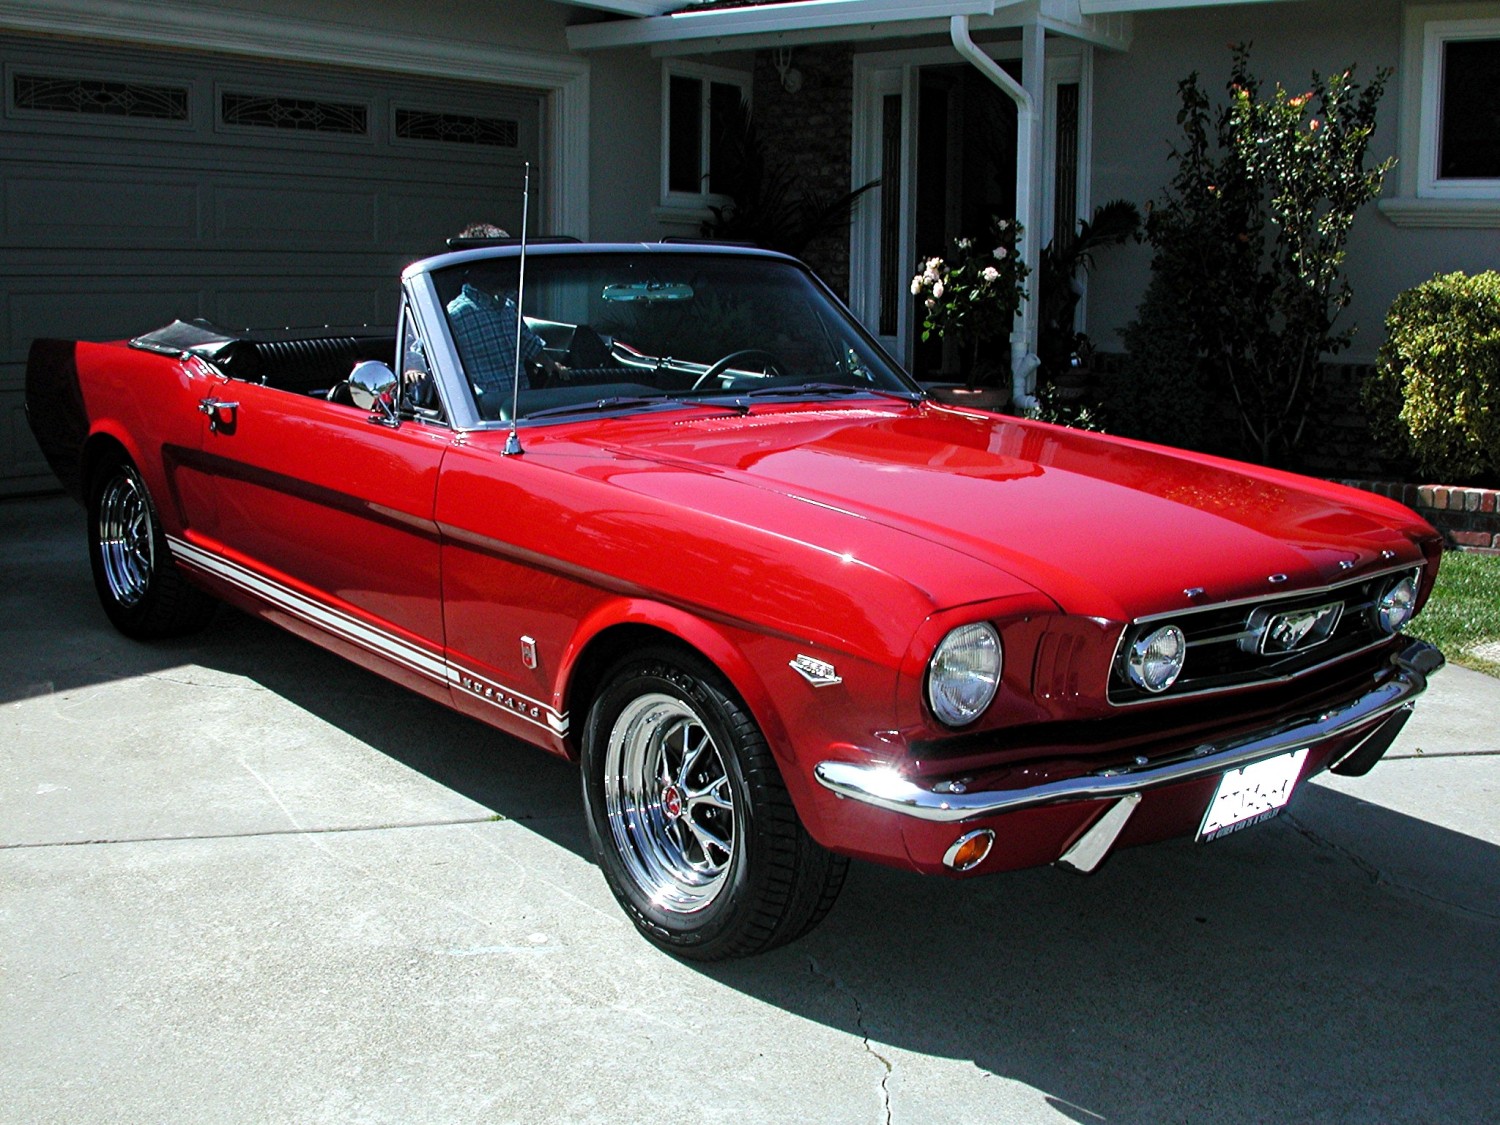 1966 Ford MUSTANG 66 GT - BrianE - Shannons Club